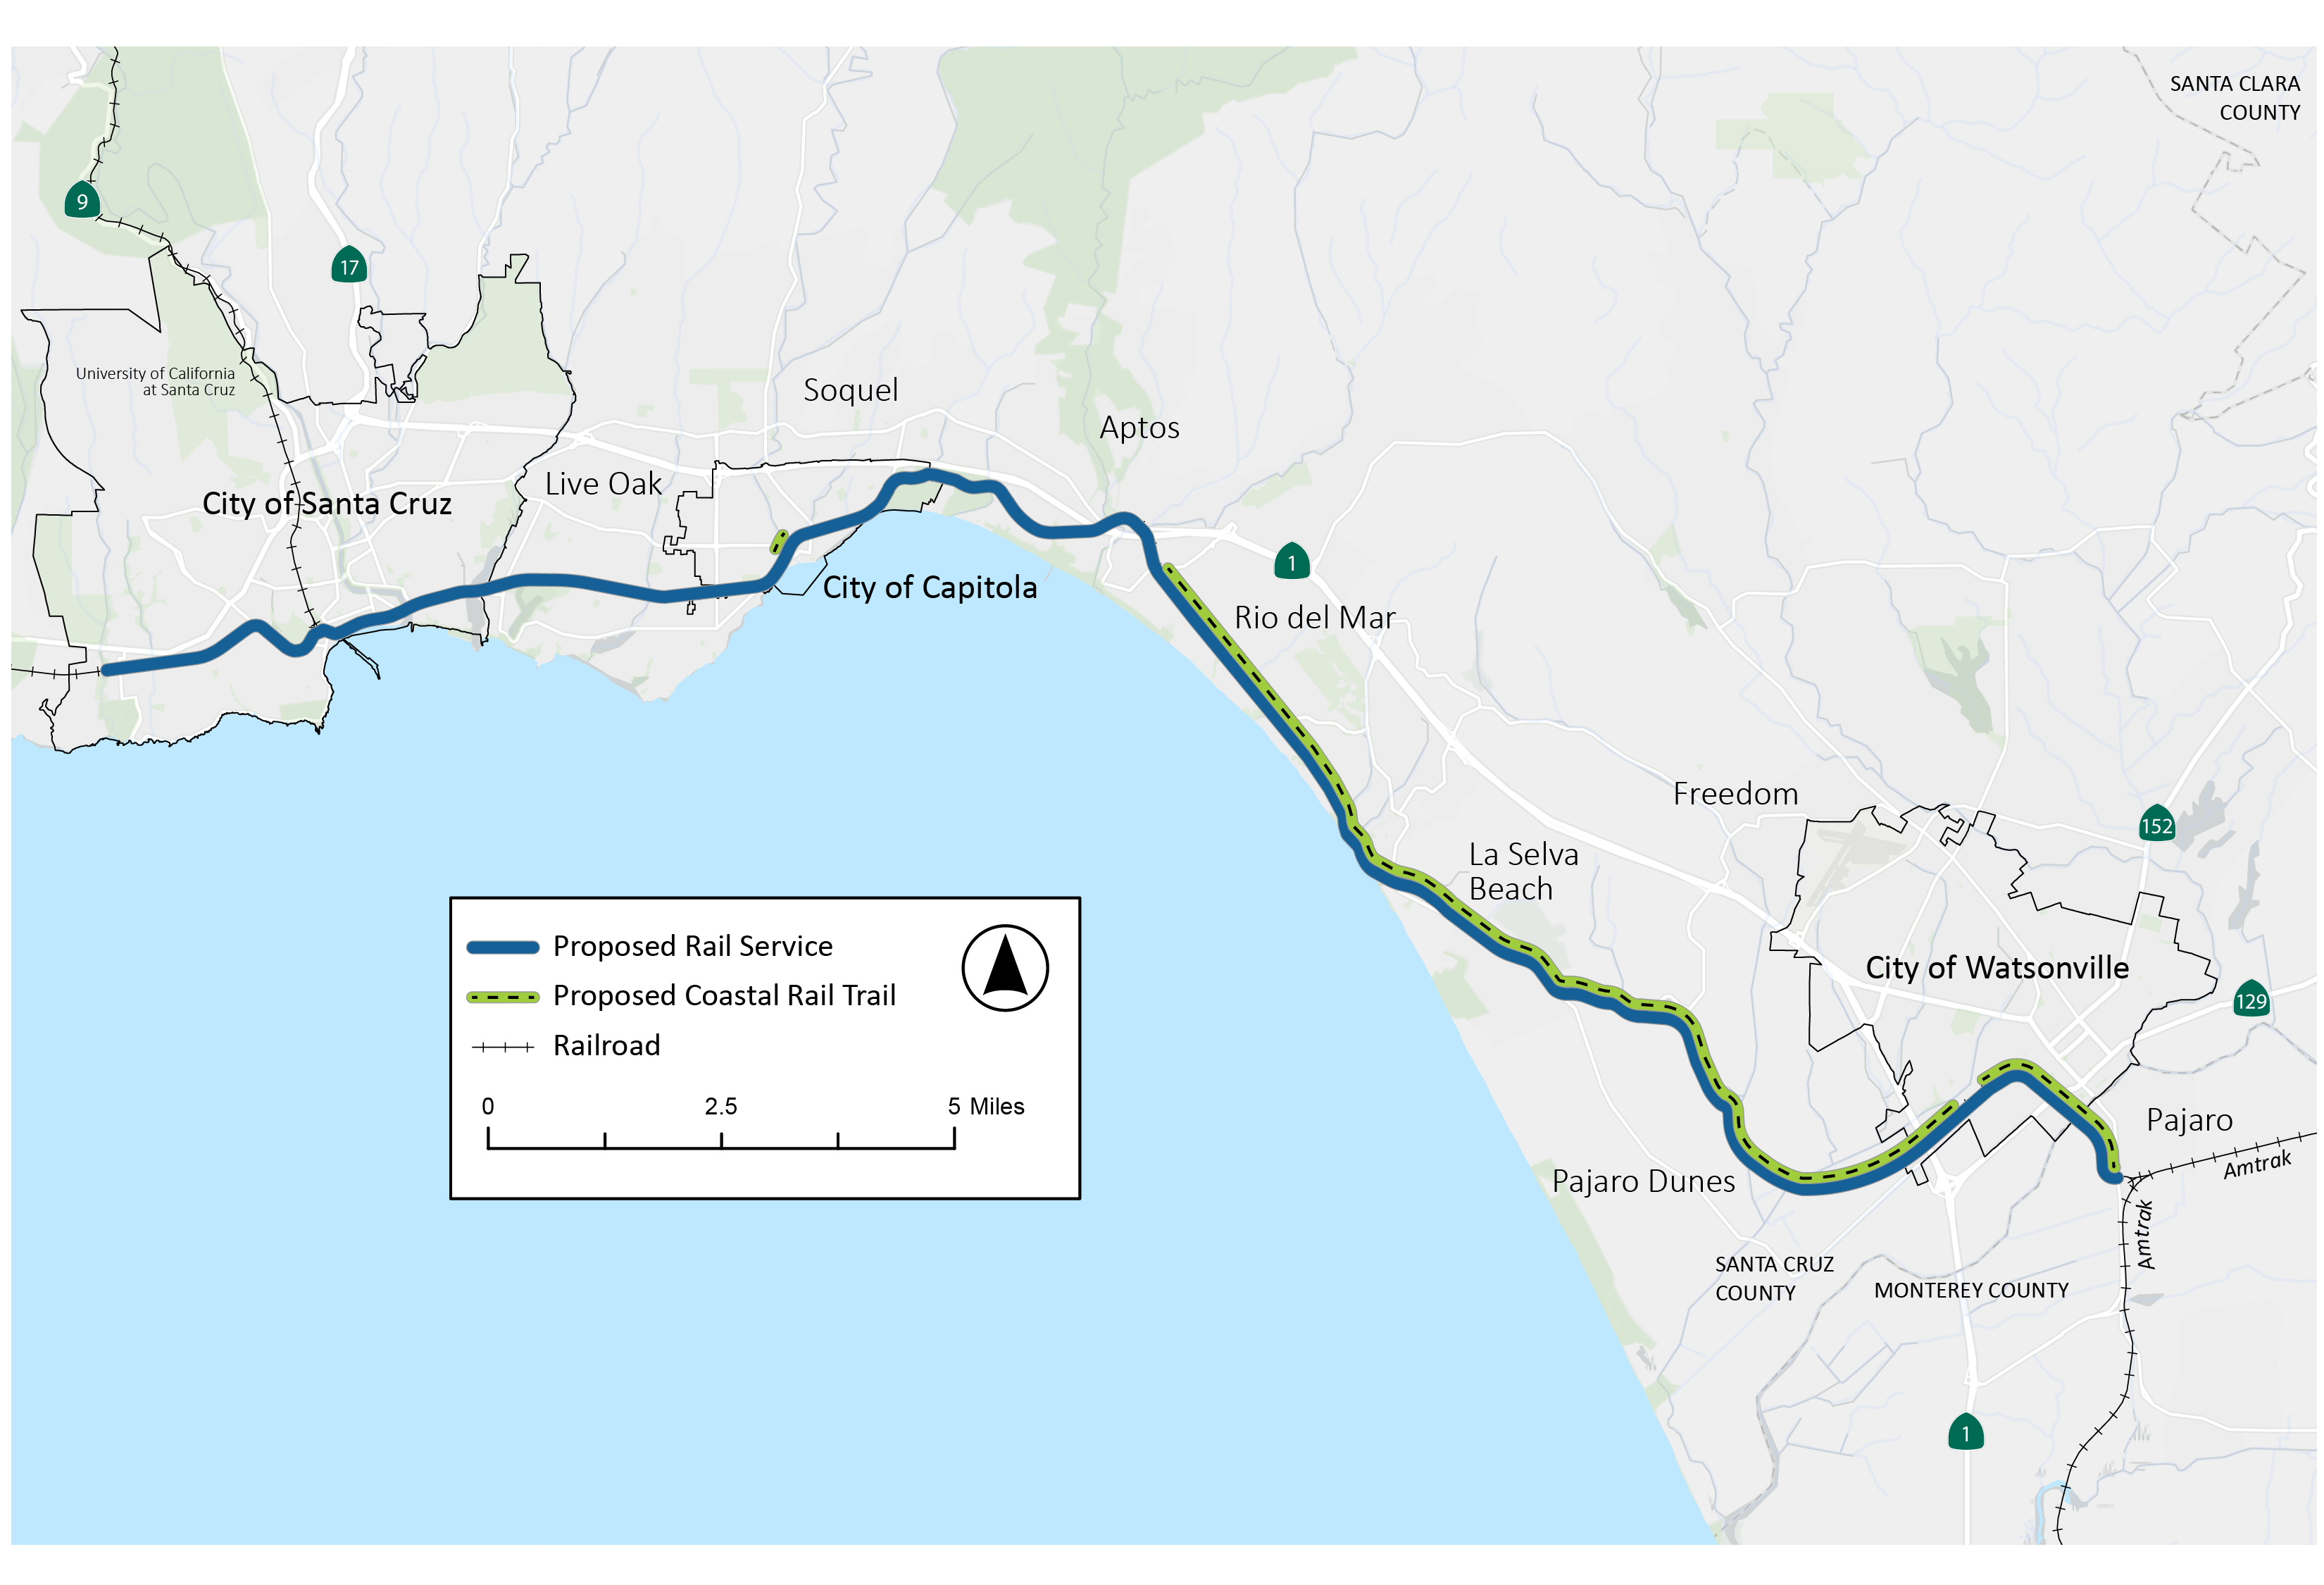 A project map showing the proposed alignment of the proposed rail service and portions of the proposed Coastal Rail Trail Segments associated with this project (Trail Segments 13-20 and Segment 11, Phase 2).